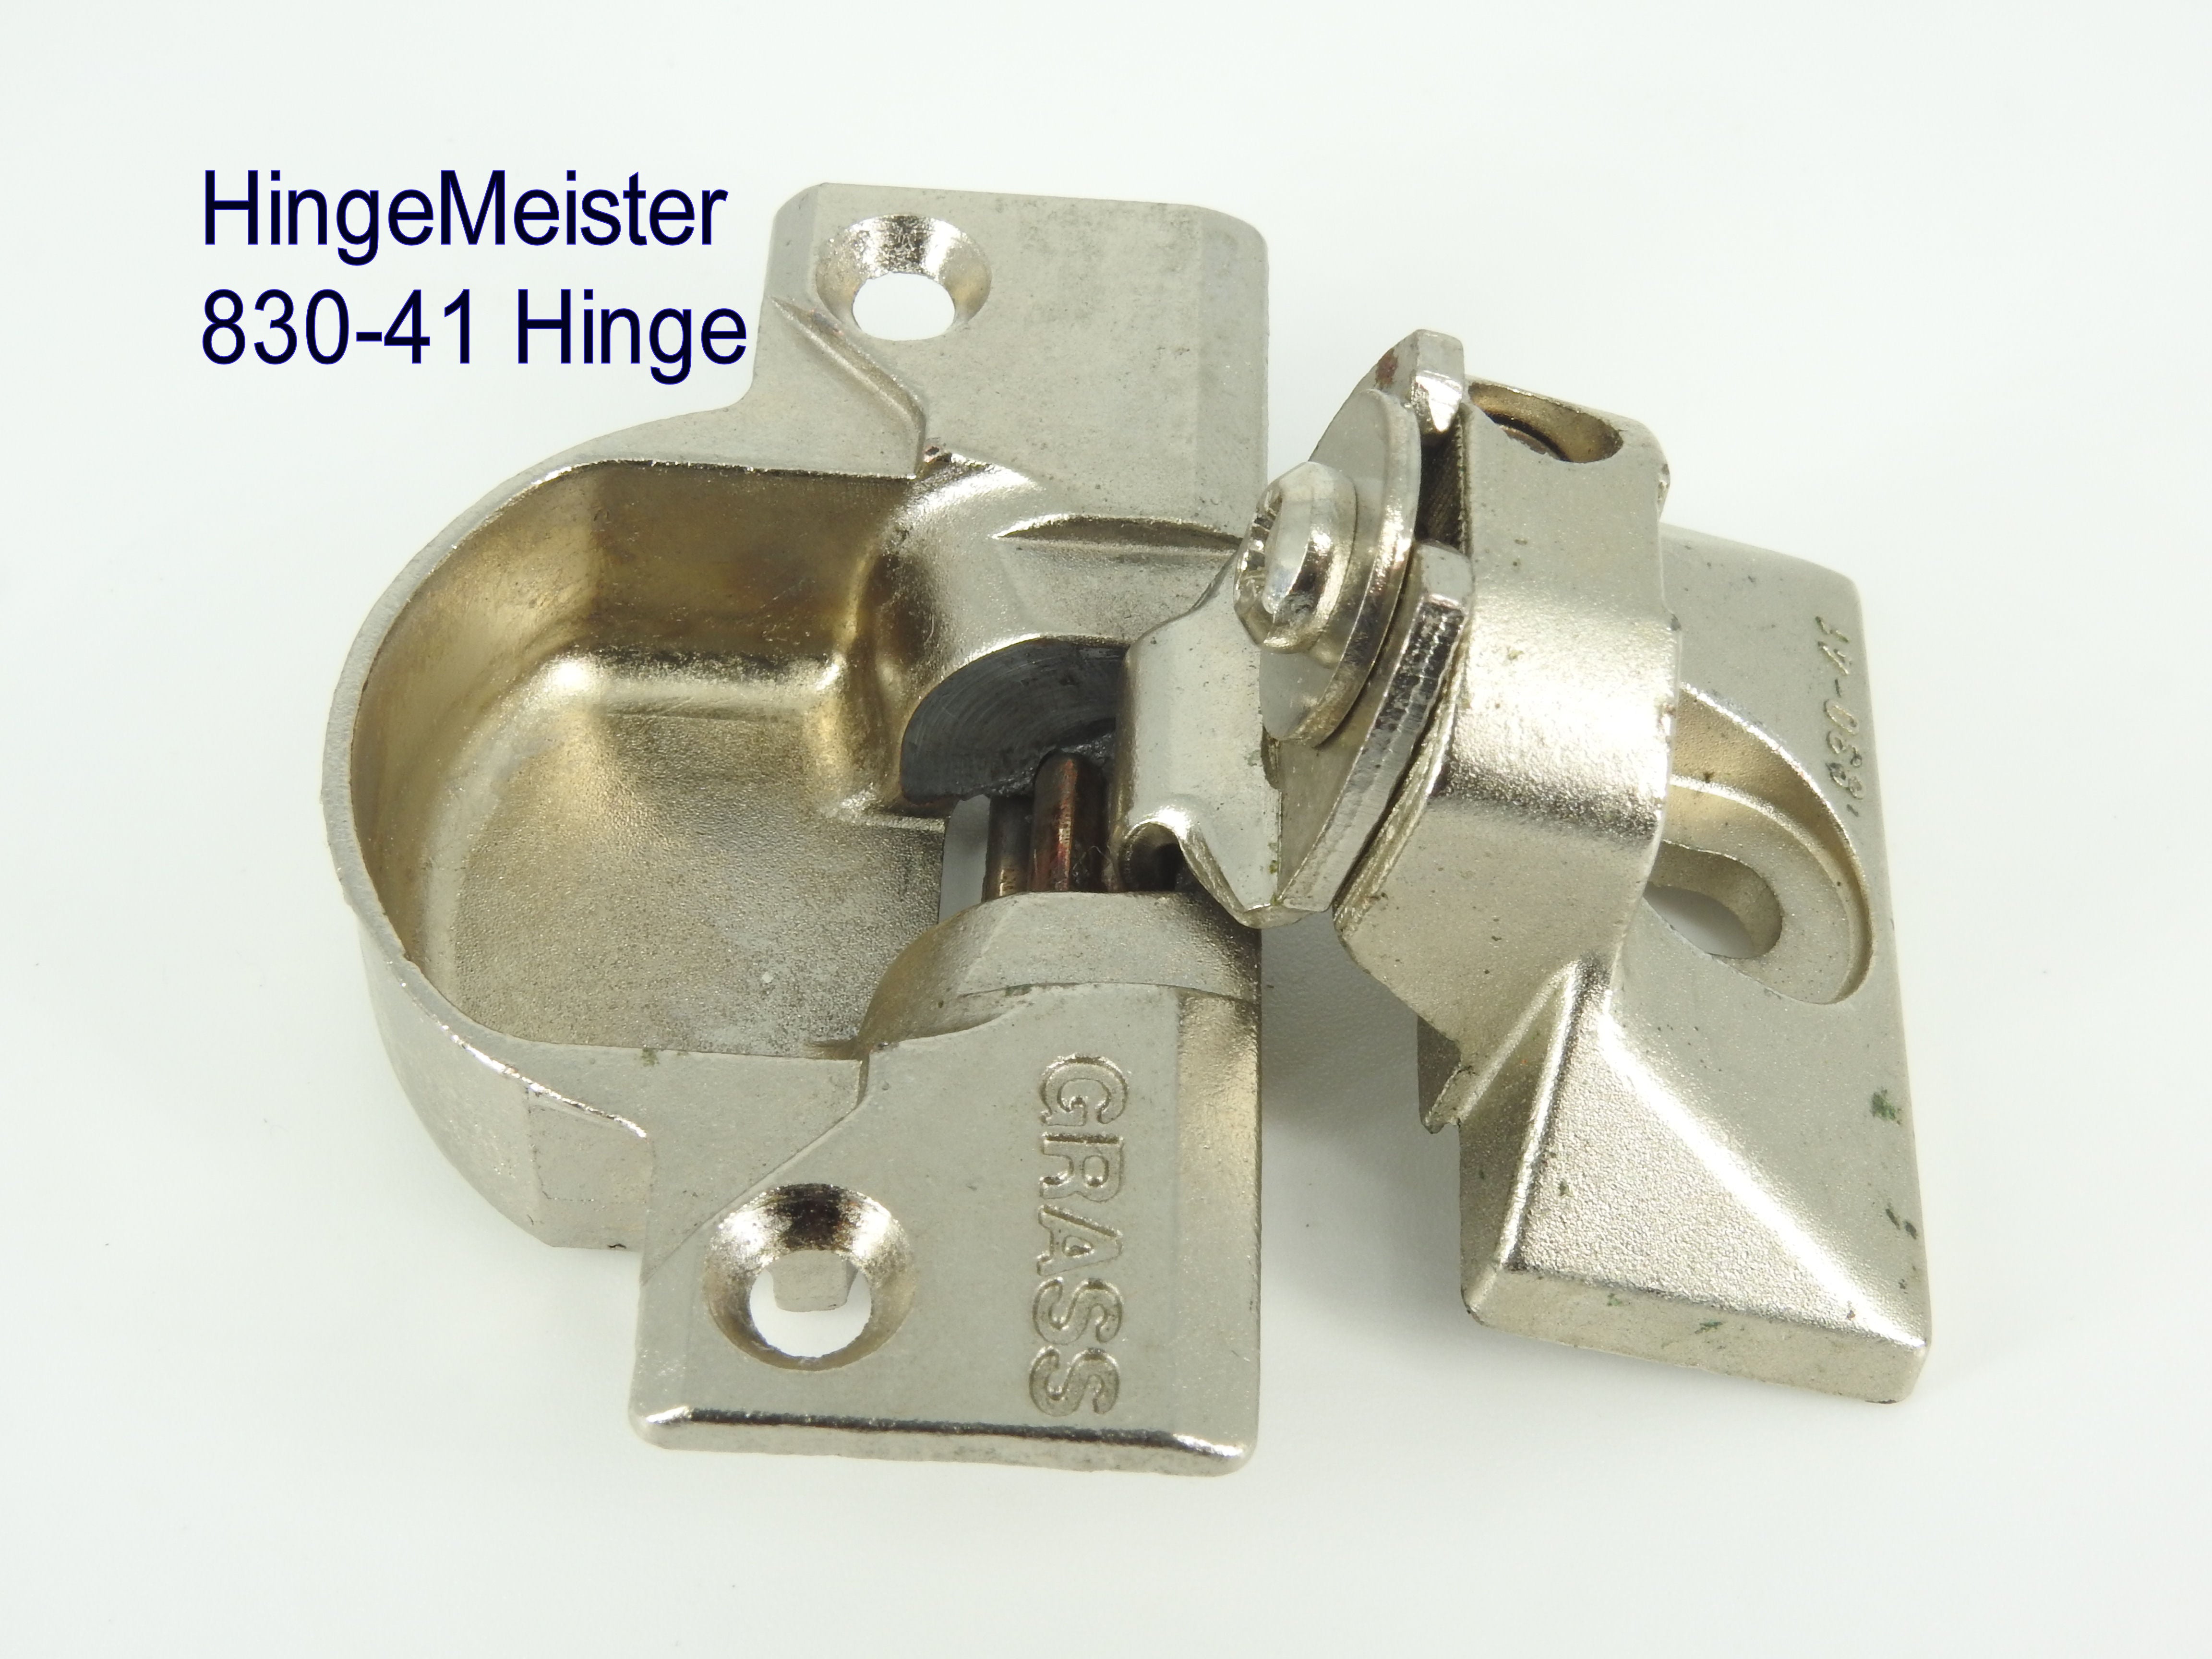 Complete Hinge Grass 830 And